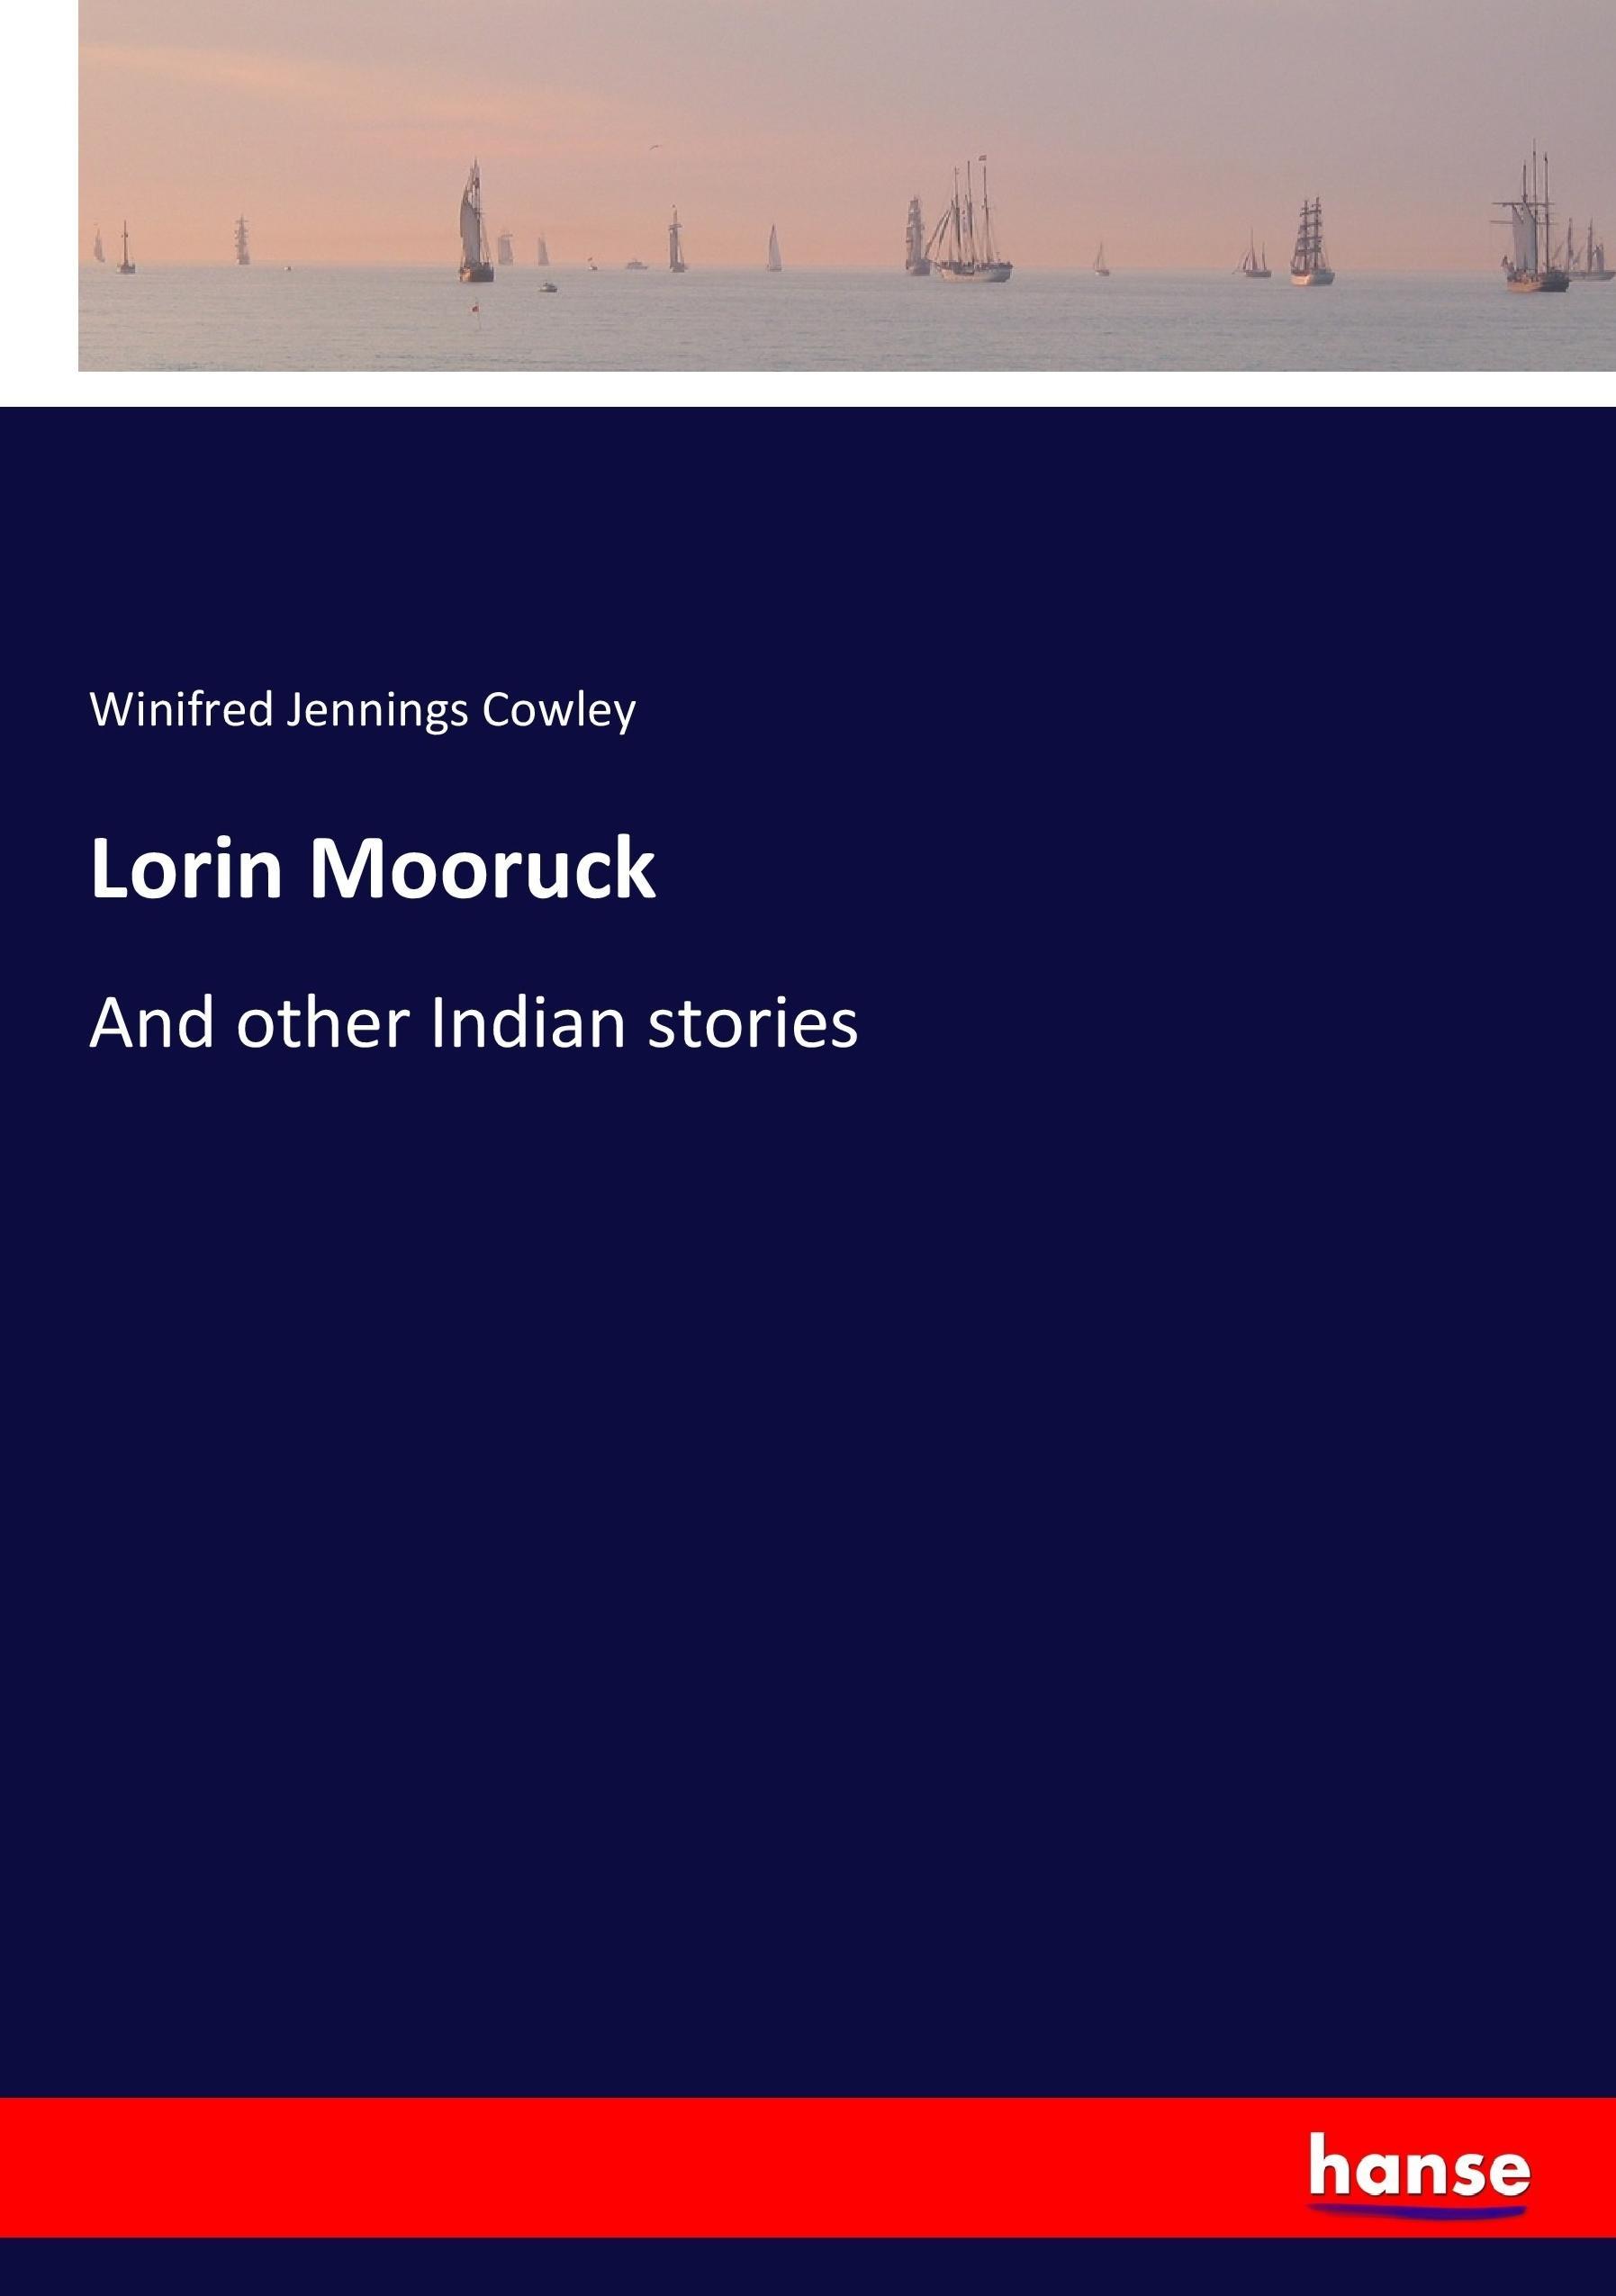 Lorin Mooruck | And other Indian stories | Winifred Jennings Cowley | Taschenbuch | Paperback | 160 S. | Englisch | 2017 | hansebooks | EAN 9783337304010 - Cowley, Winifred Jennings